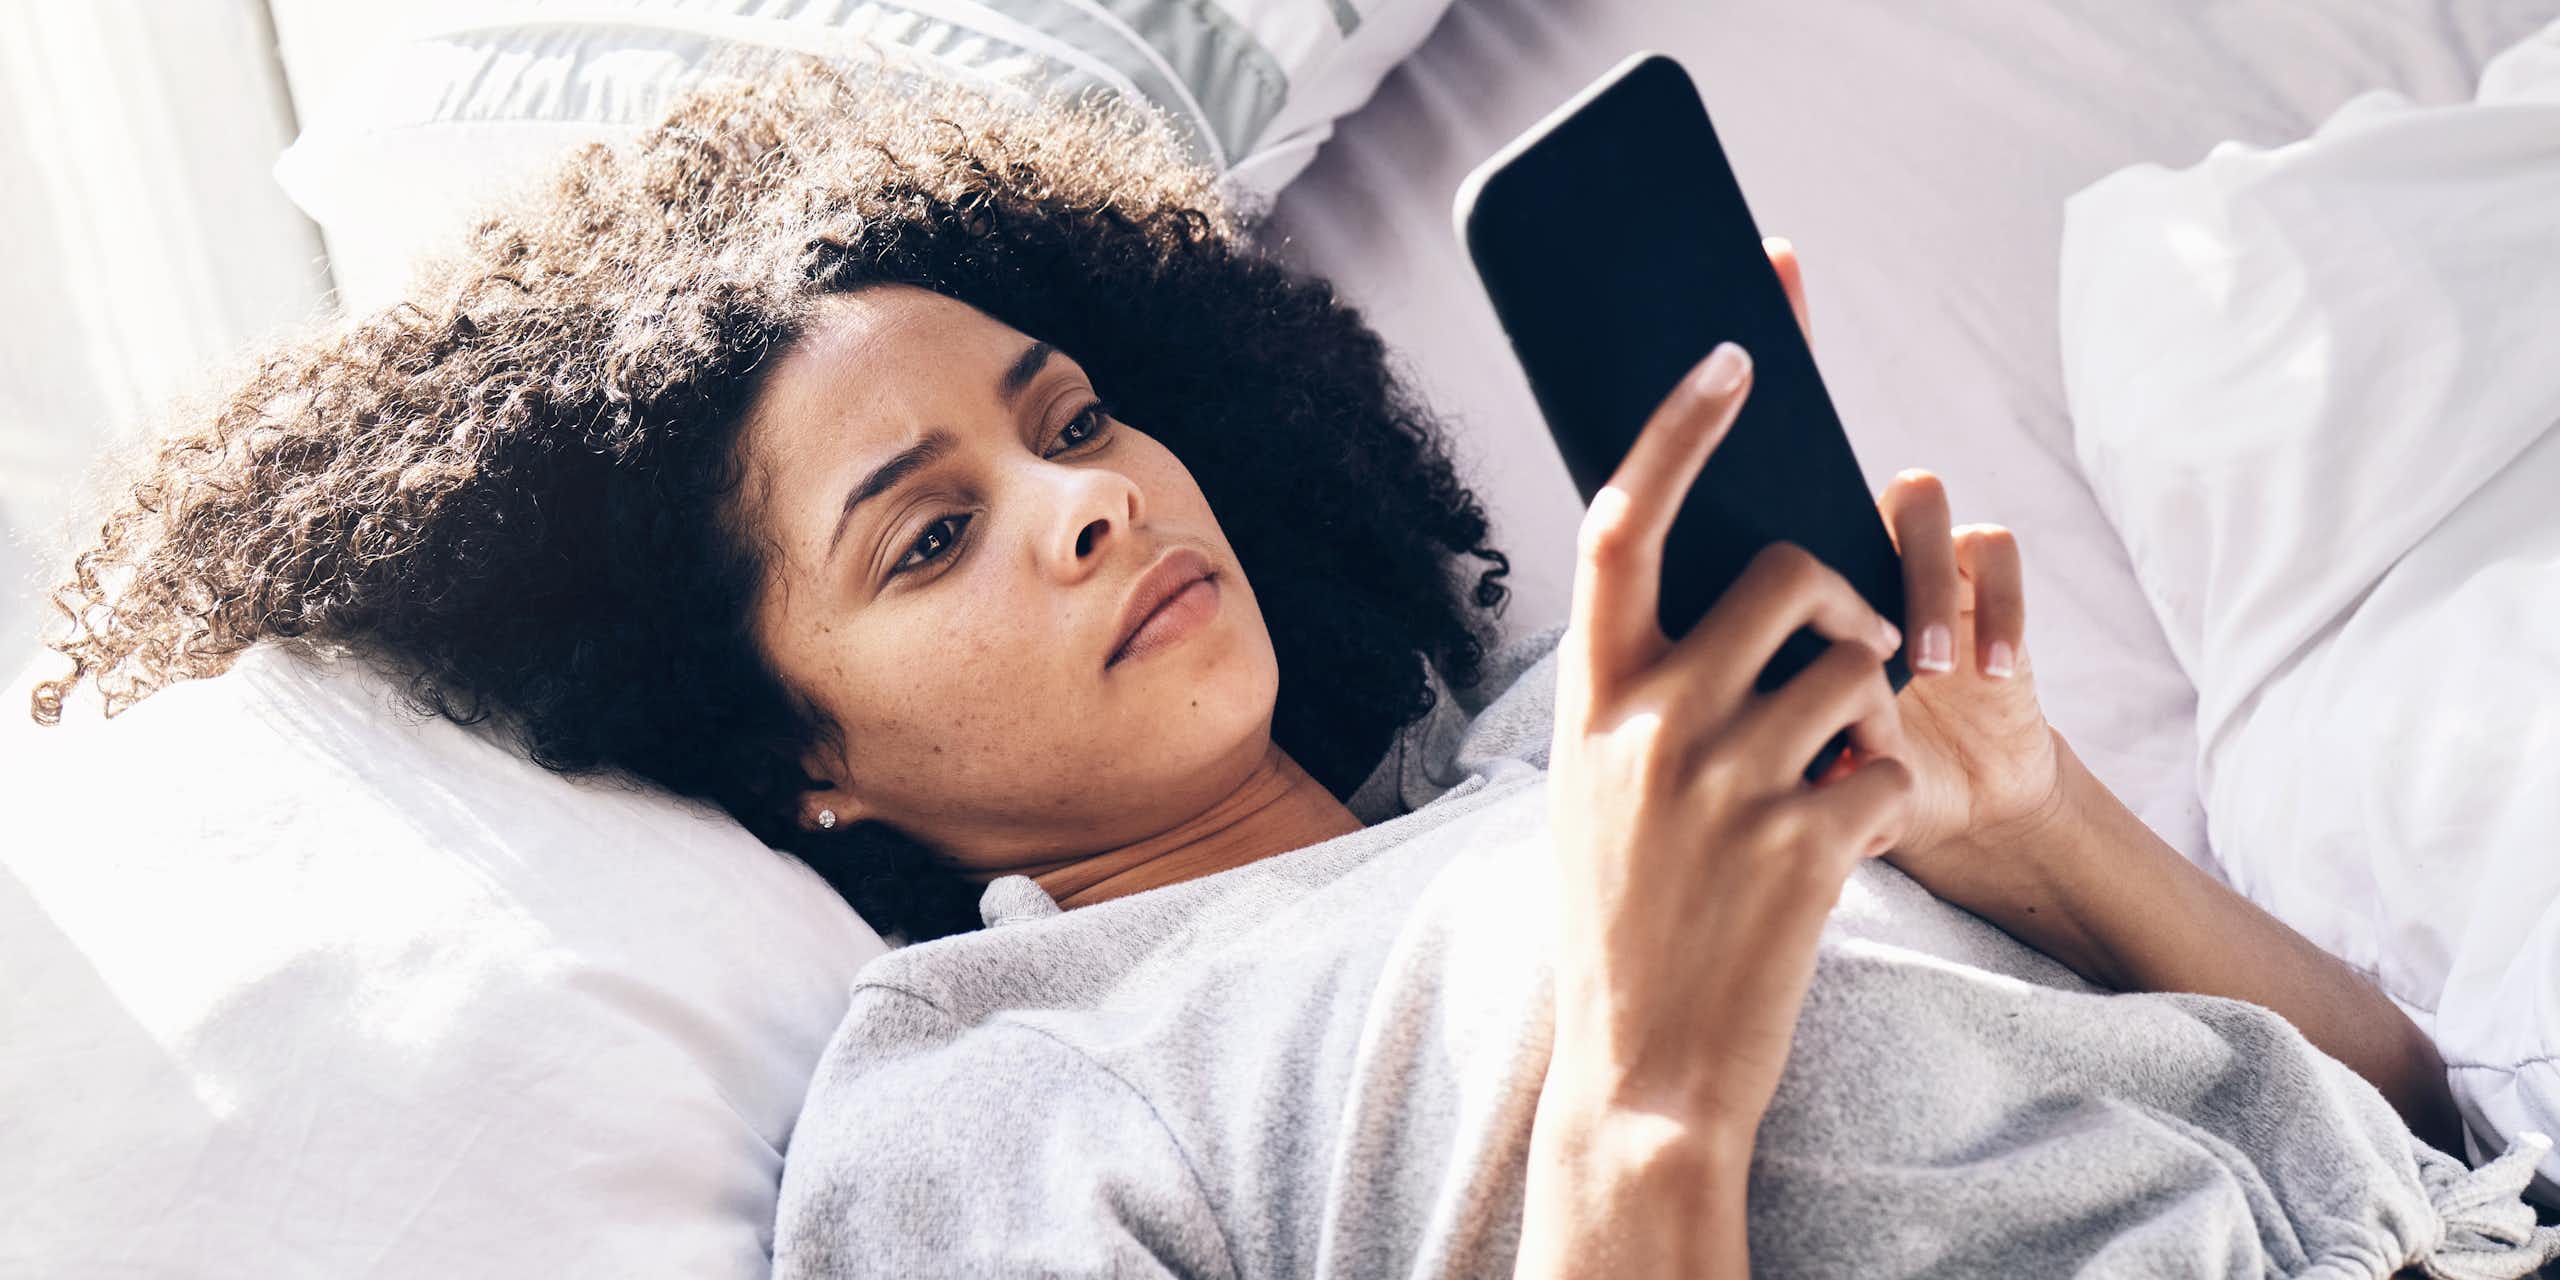 A young woman lying on a bed looking at a phone